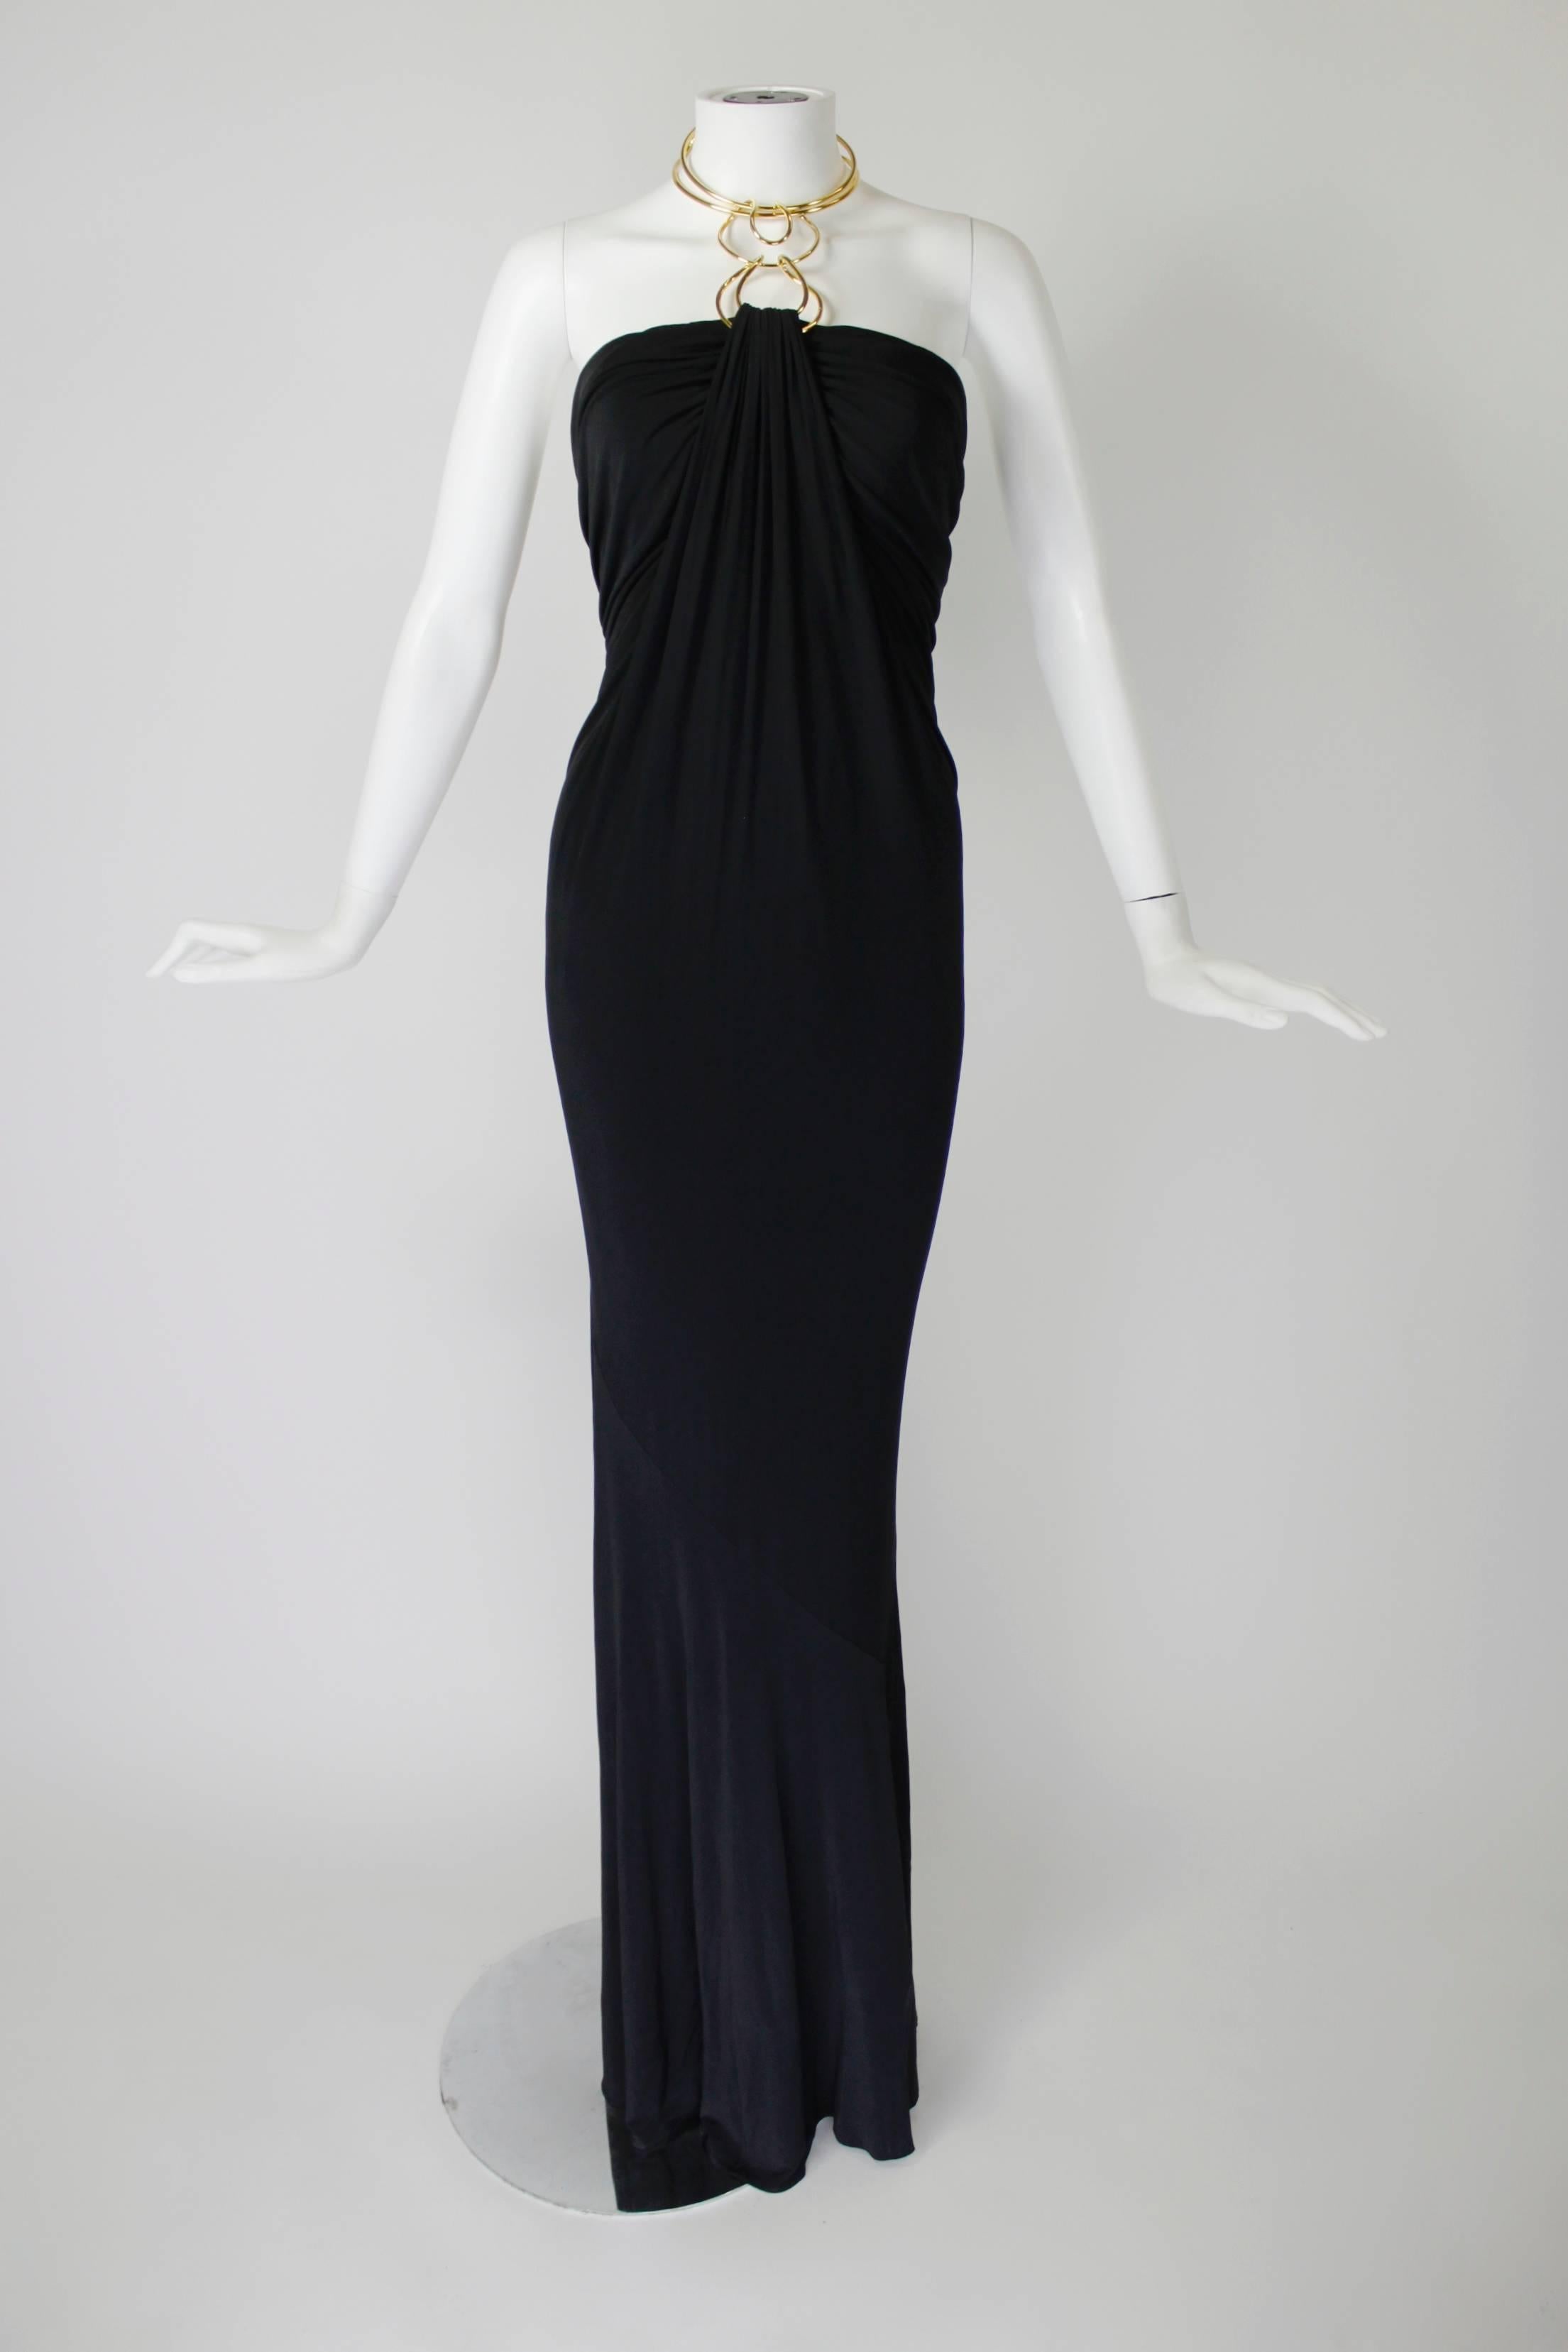 An insanely sexy, slinky jersey evening gown from Donna Karan. The halter neck is gathered by interlocking gold-tone metal loops, creating a collar necklace.

Marked a size Medium.

Measurements--
Bust: 32 inches, relaxed; stretches up to 38